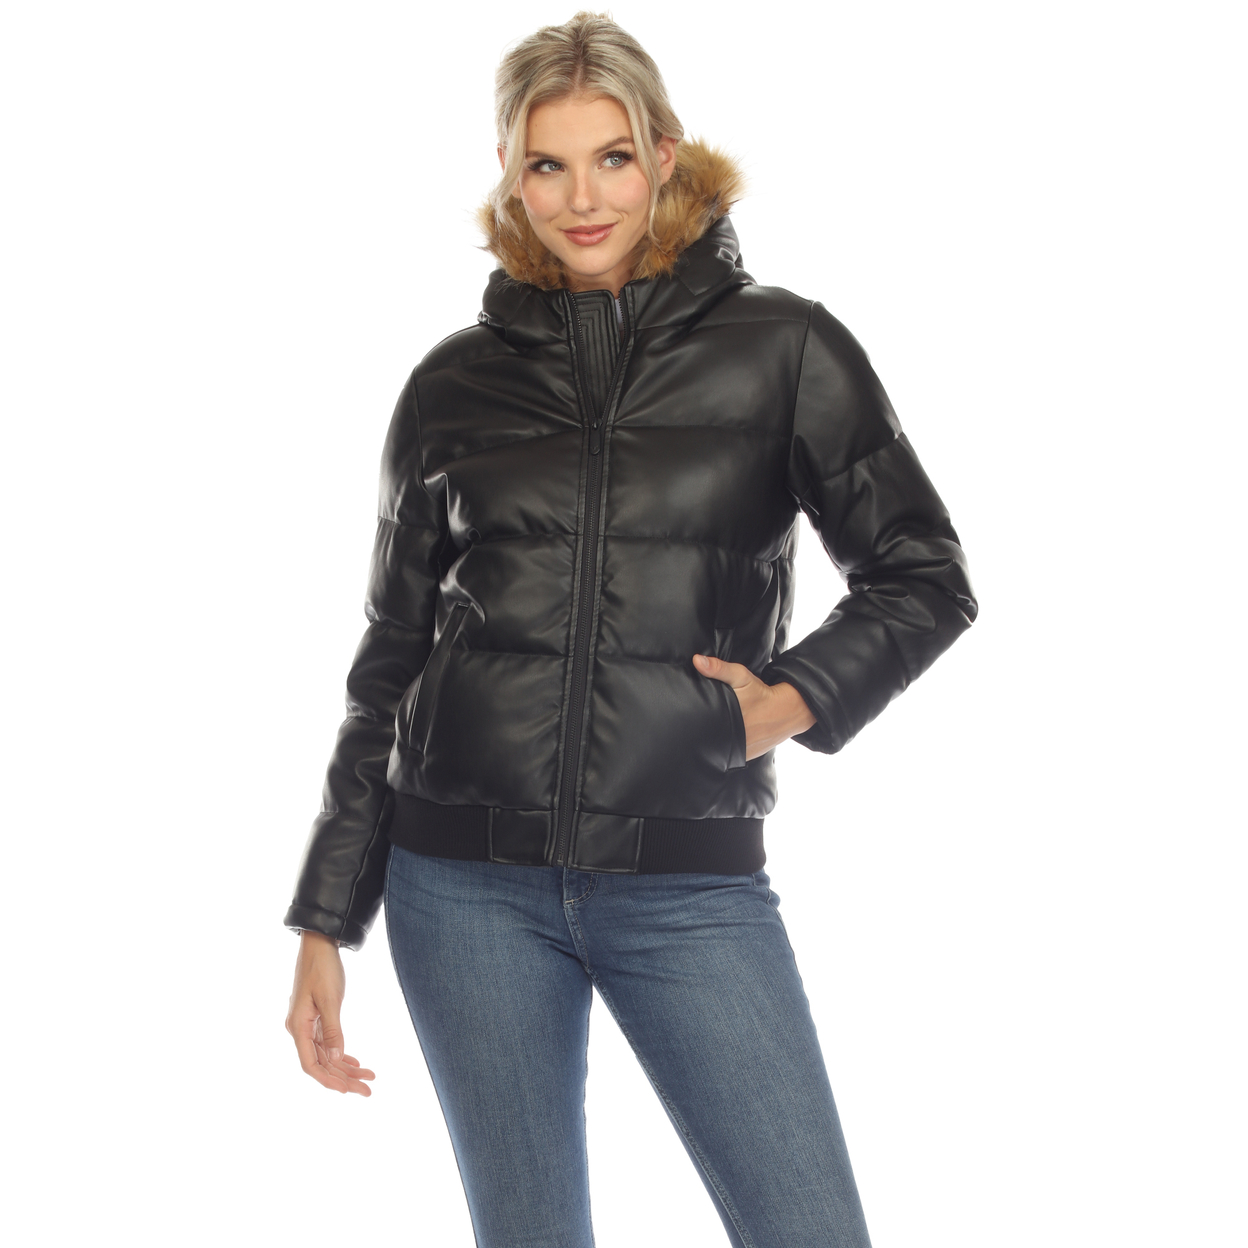 White Mark Women's Removable Fur Hoodie PU Leather Puffer Jacket - Black, X-large